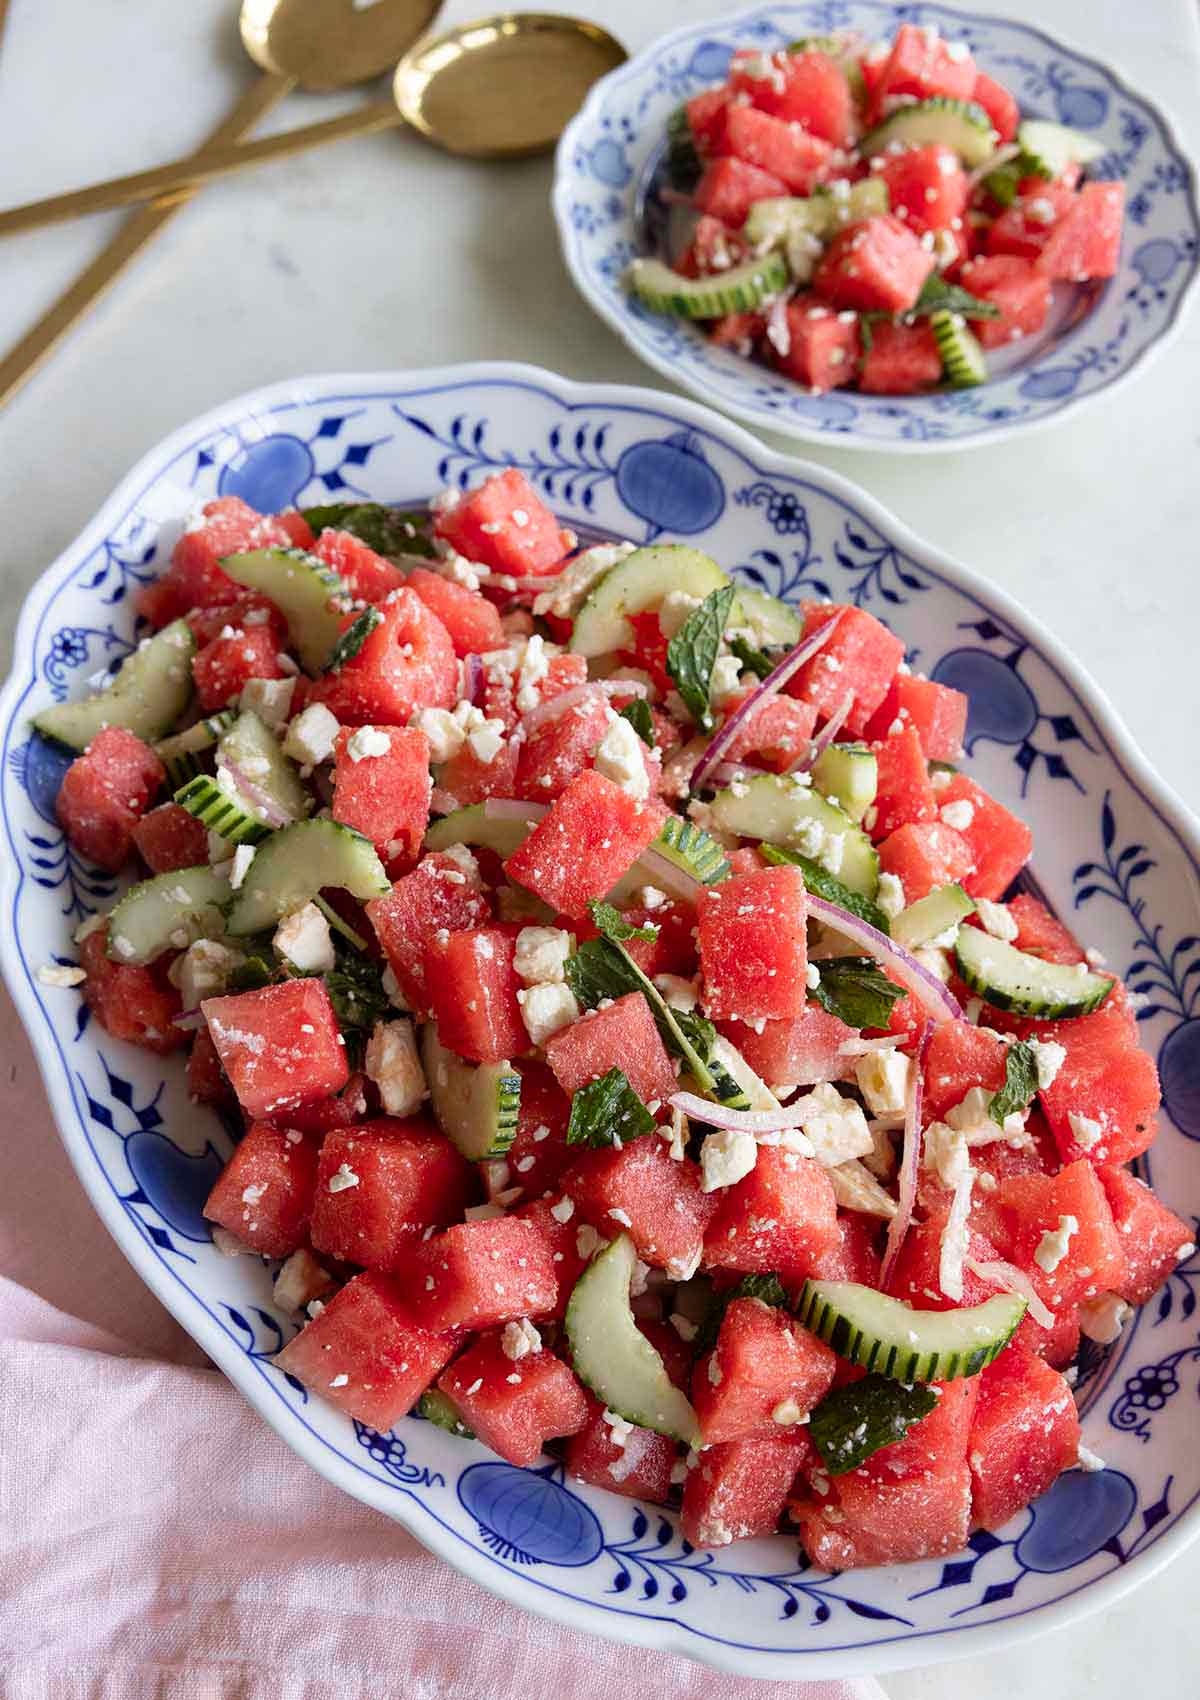 An oval platter of watermelon salad with a plate of it beside it along with serving spoons.